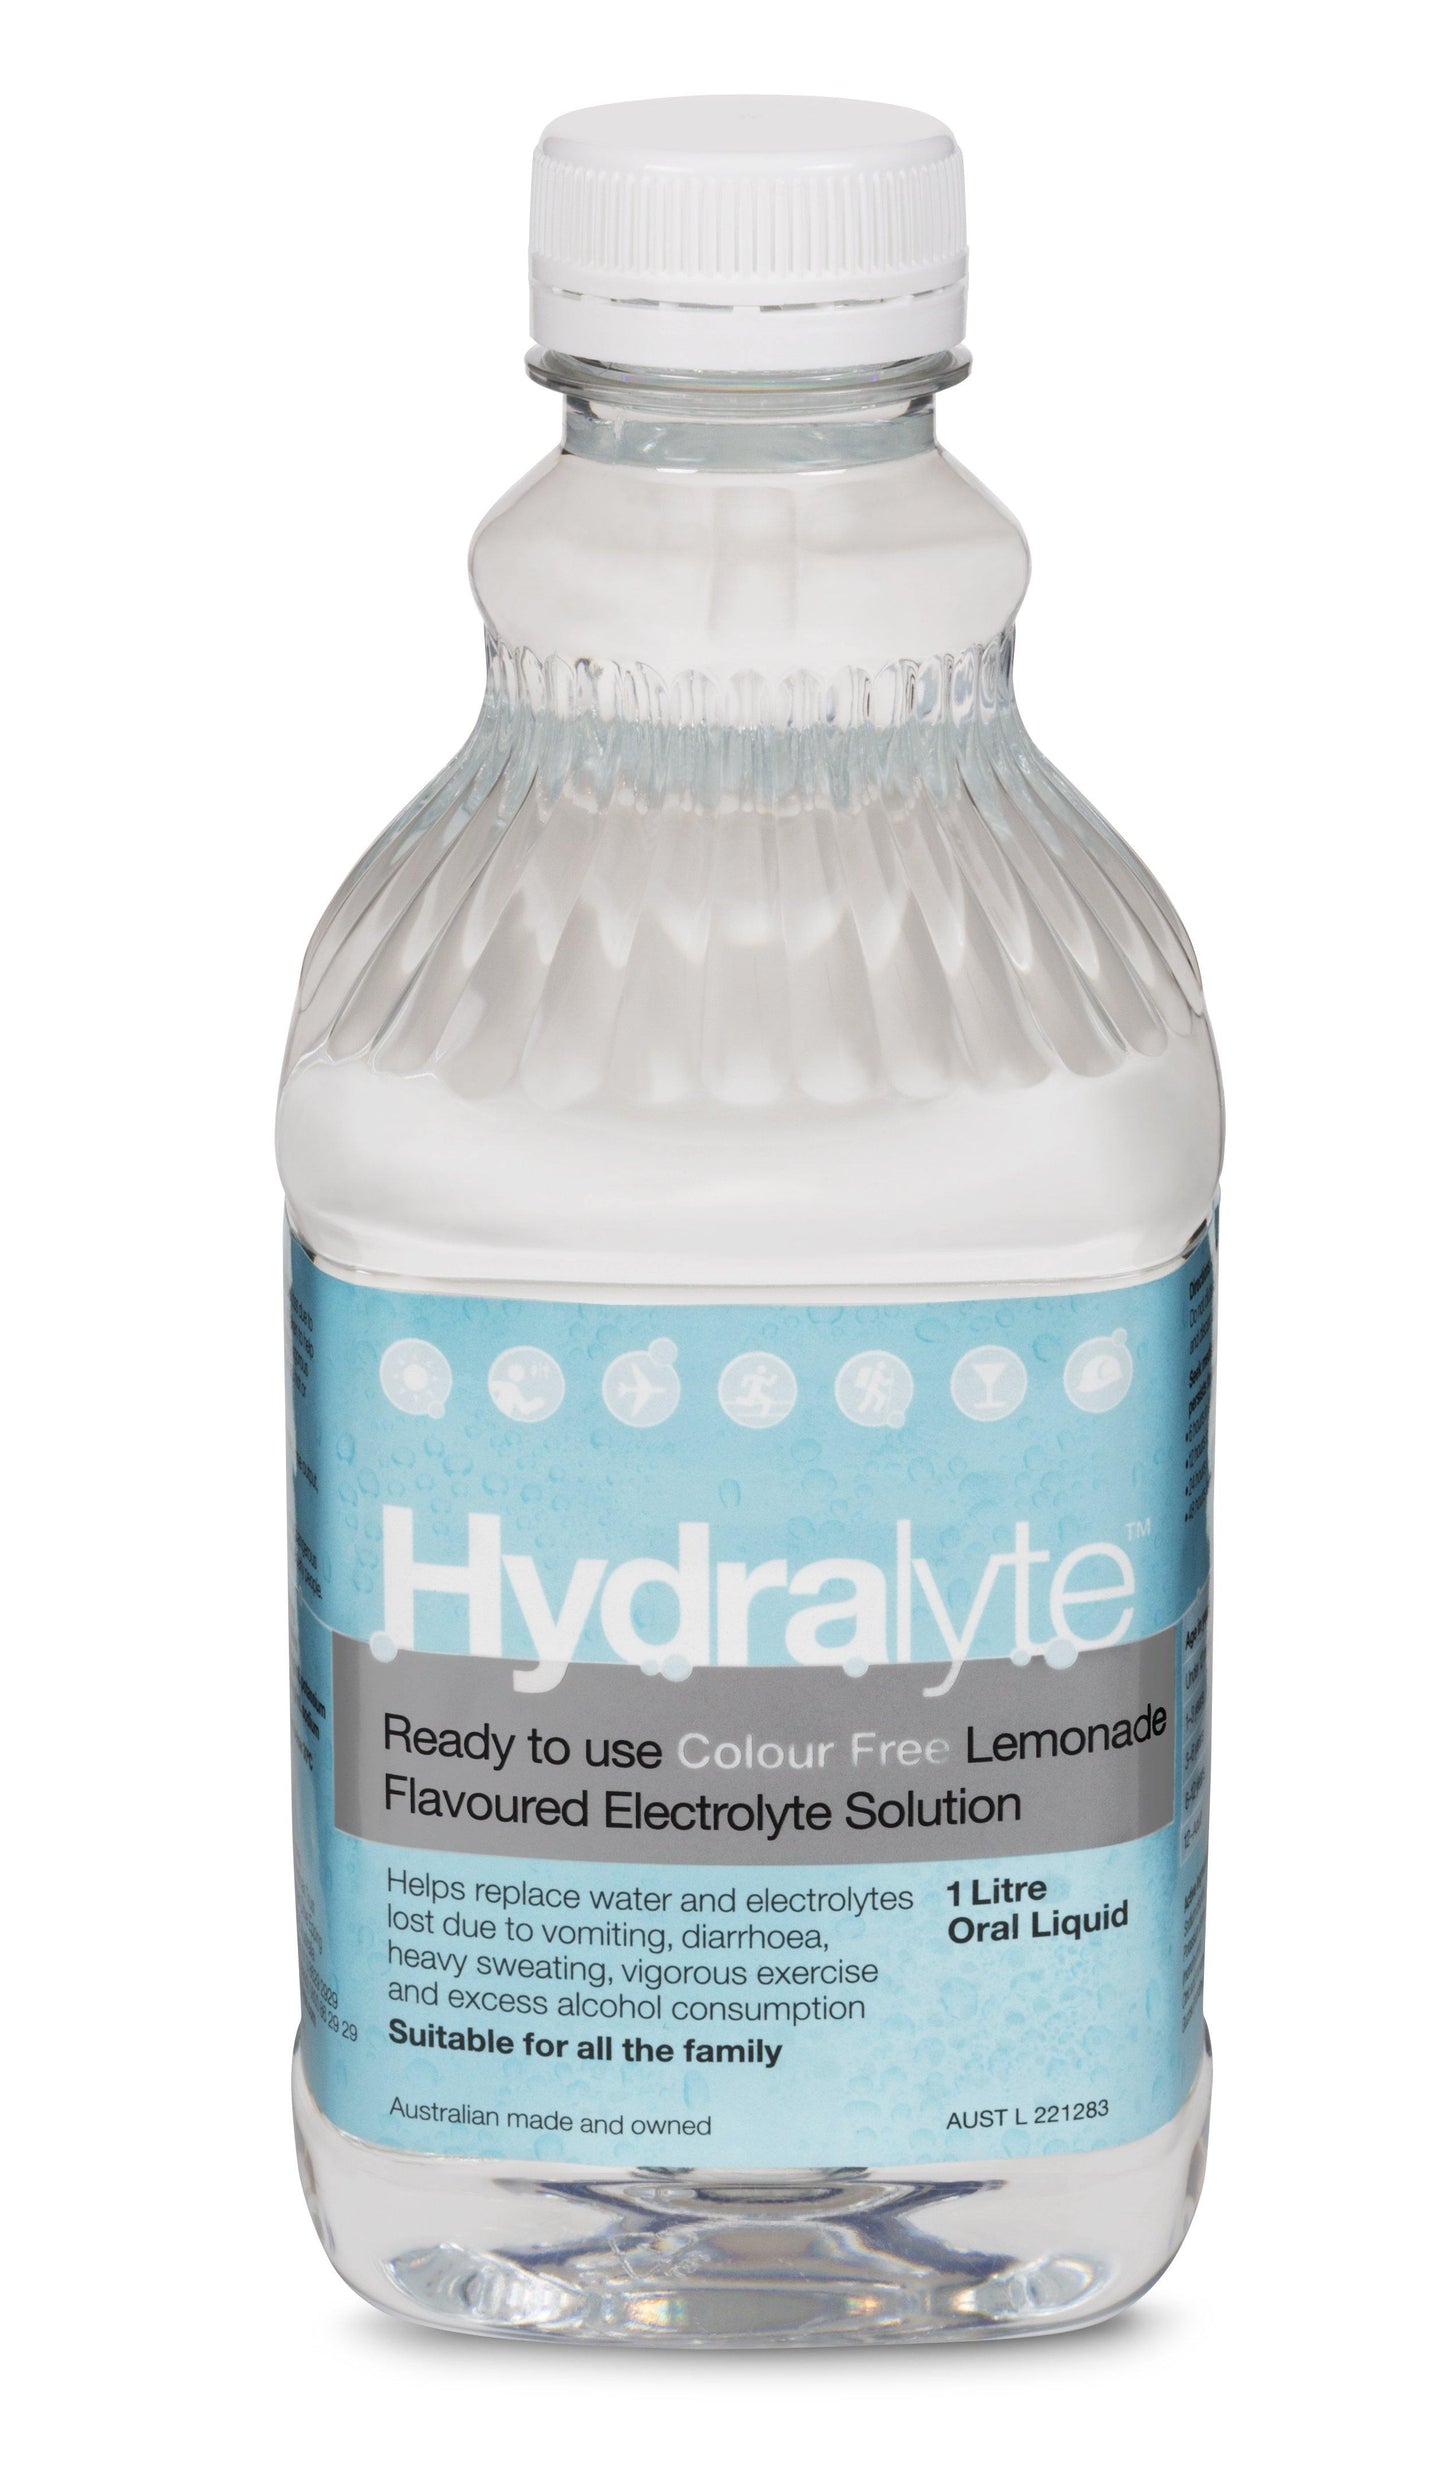 Hydralyte Ready to Drink colour free Lemonade Electrolyte Solution 1 litre